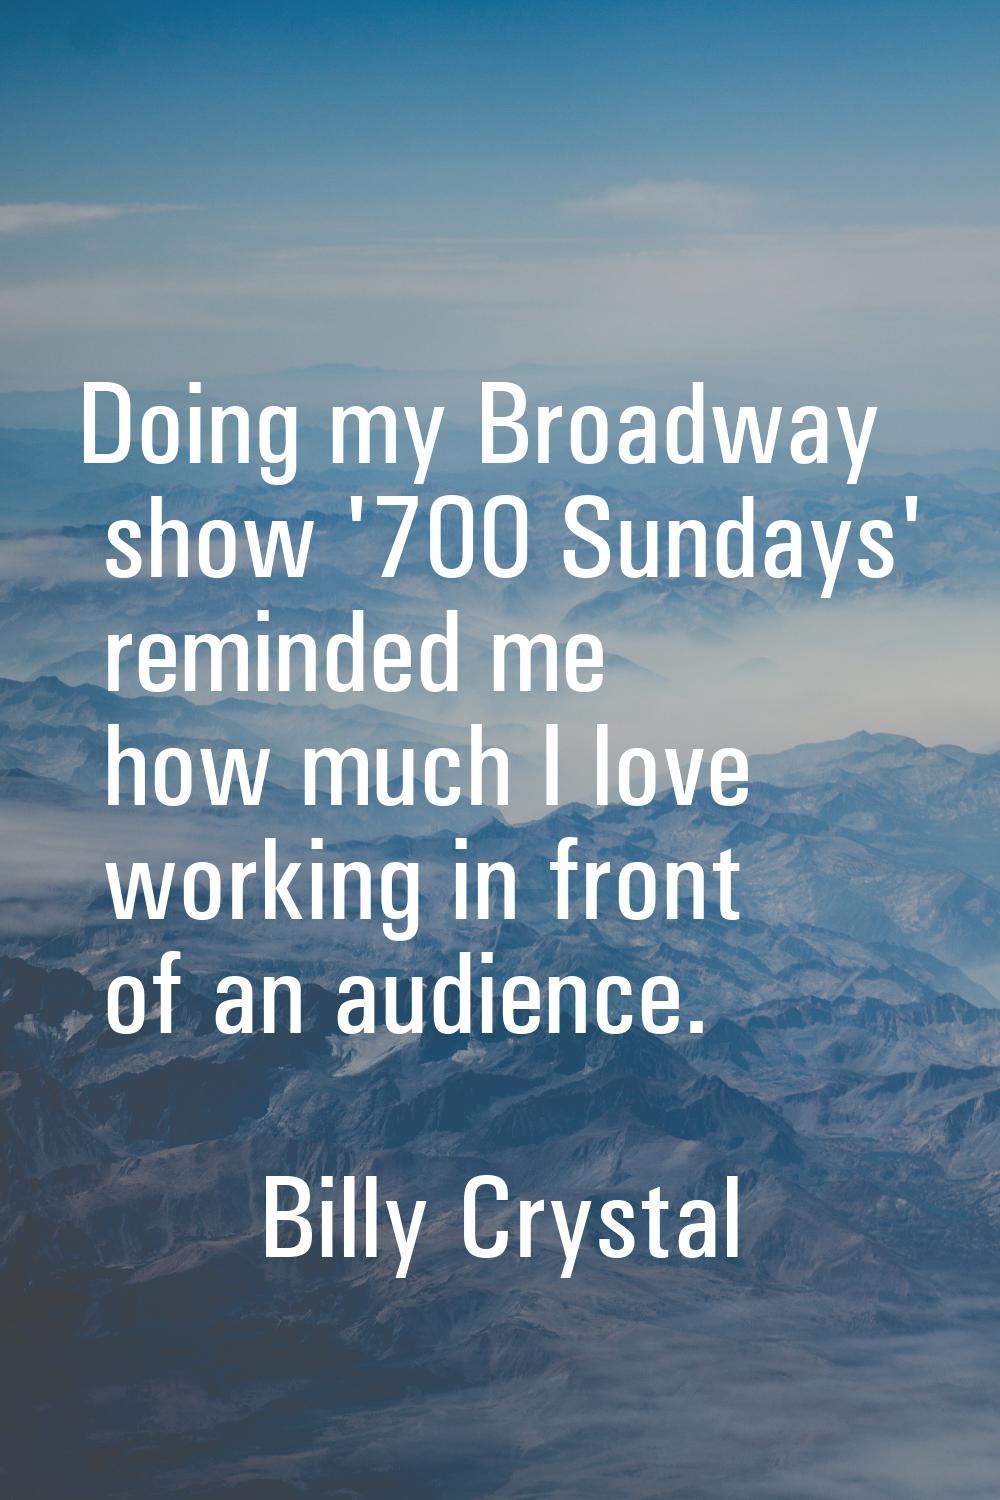 Doing my Broadway show '700 Sundays' reminded me how much I love working in front of an audience.